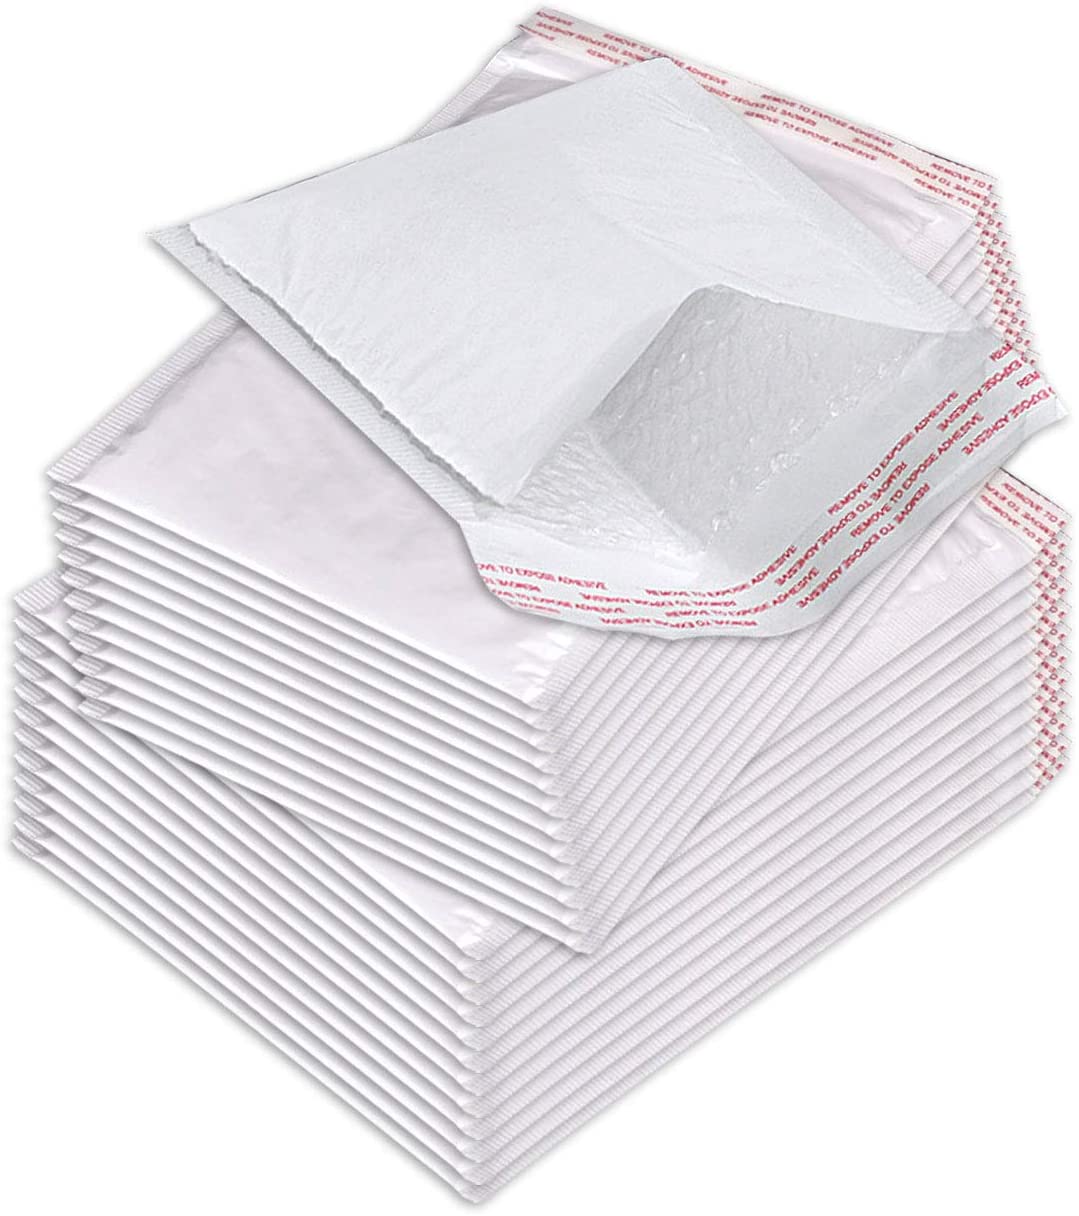 250 - #0 - 6x10 POLY BUBBLE MAILERS PADDED ENVELOPES